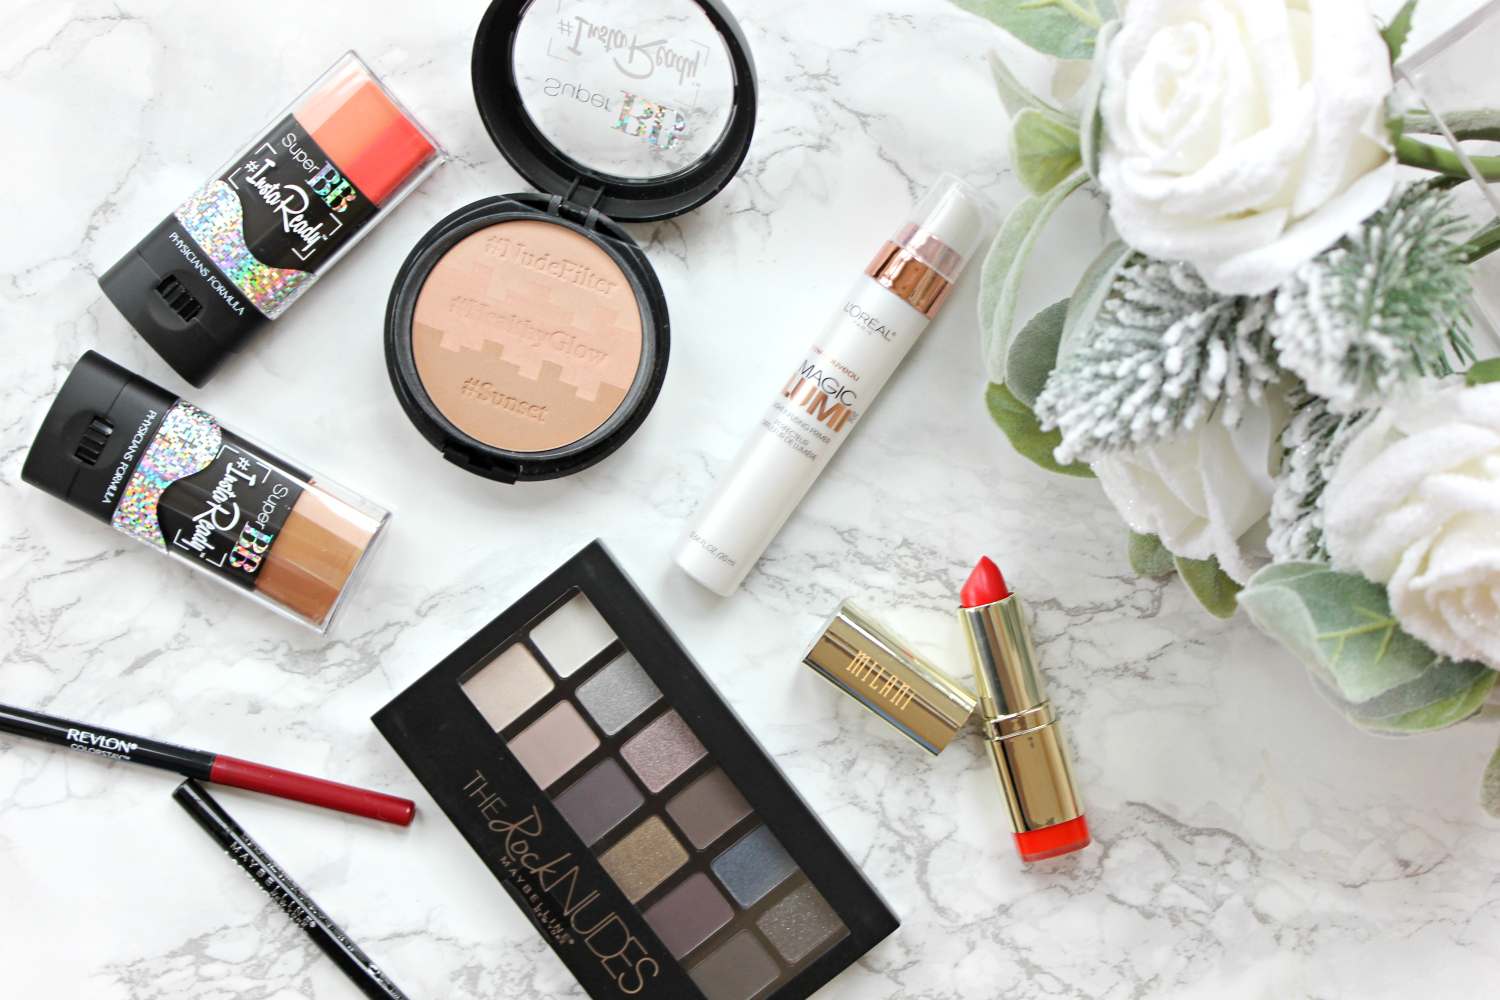 10 tips for looking better in holiday photos, featuring my picks for the best drugstore makeup for photos from CVS